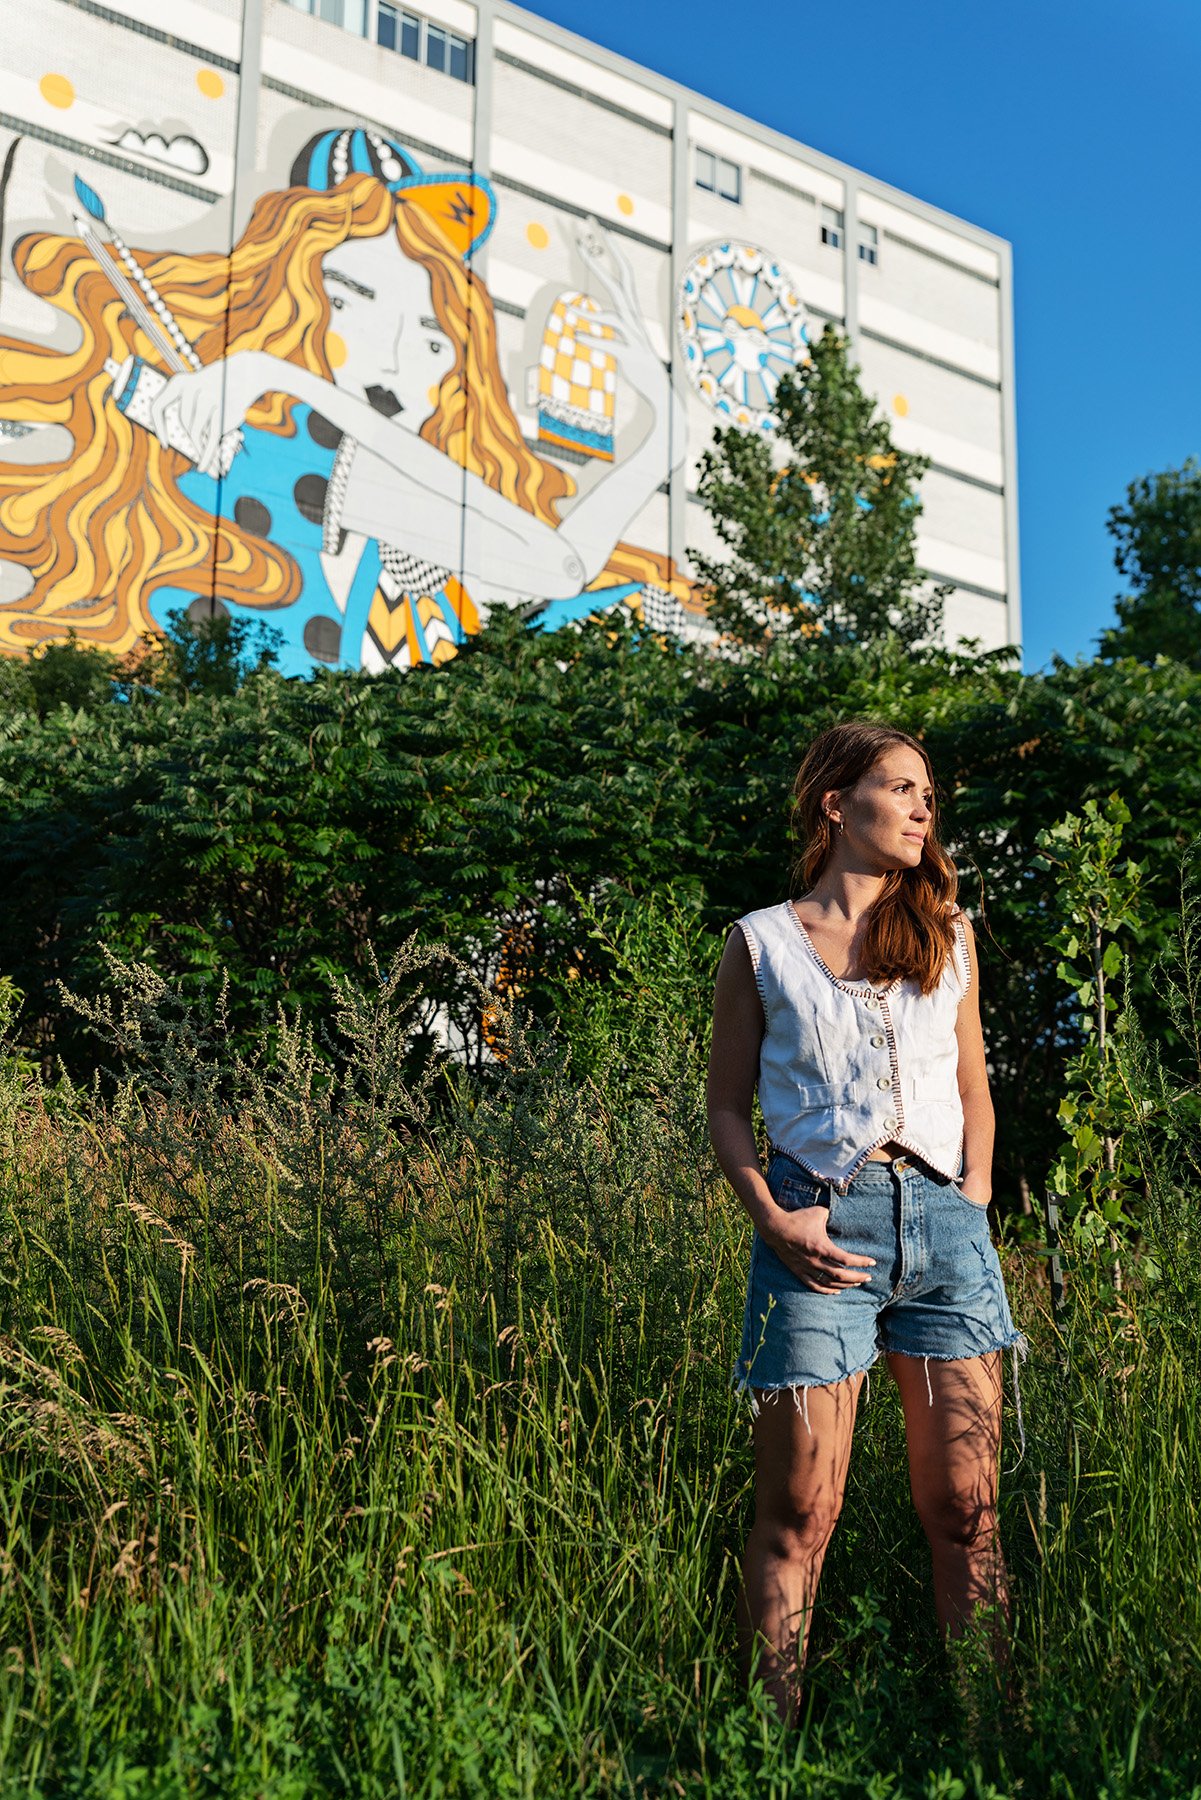 Brittany stands in front of greenery and another mural in Mile End in this photo by David Giral